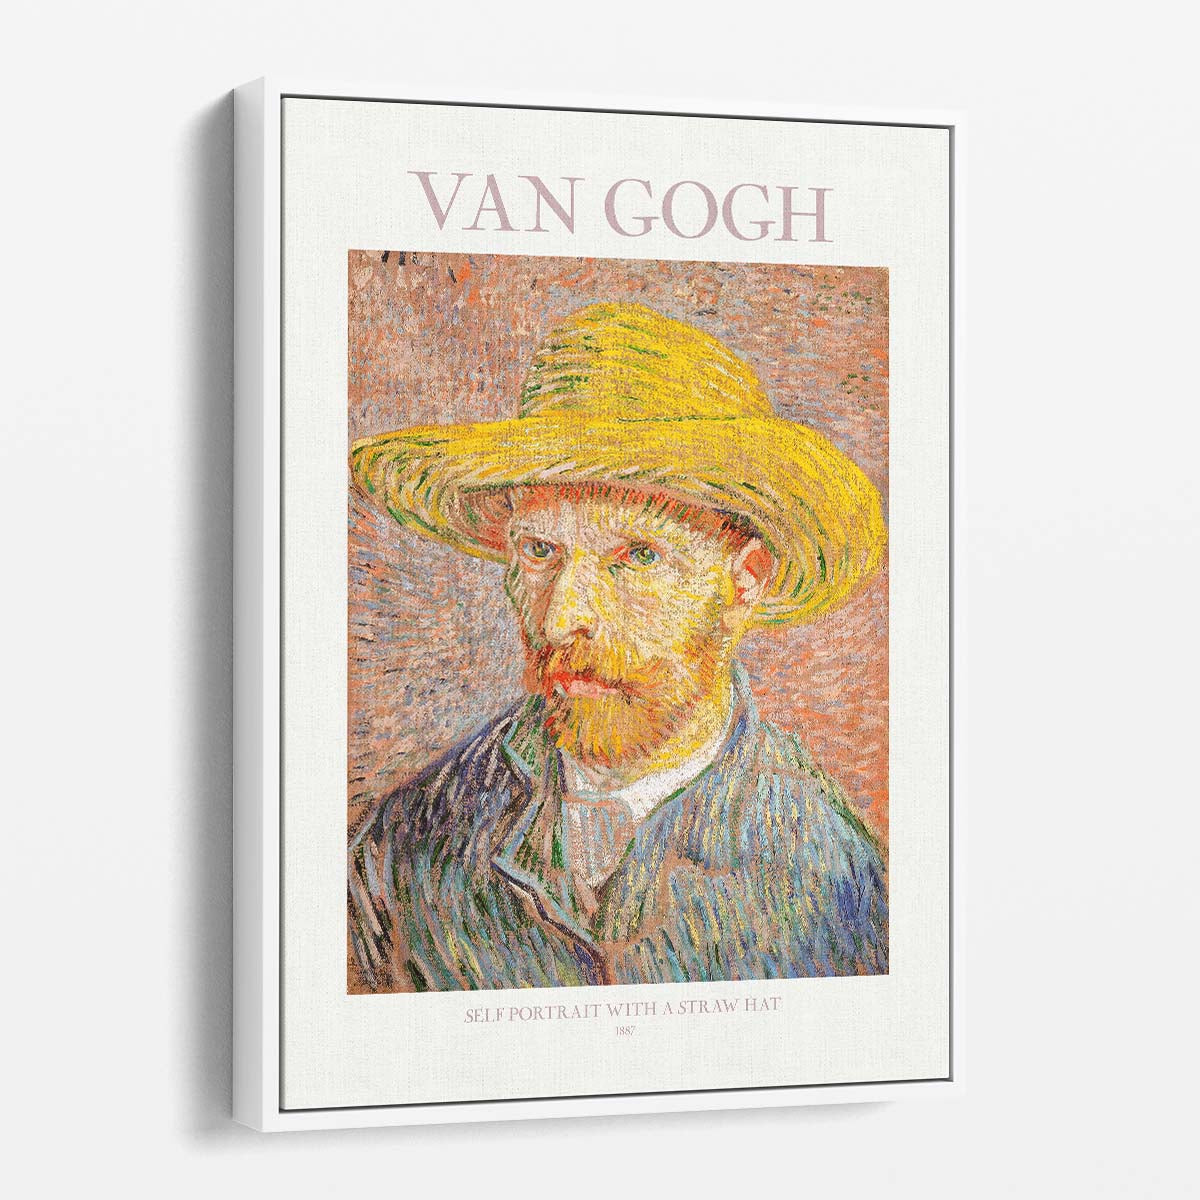 Van Gogh Self-Portrait with Straw Hat, Master Oil Painting Illustration by Luxuriance Designs, made in USA